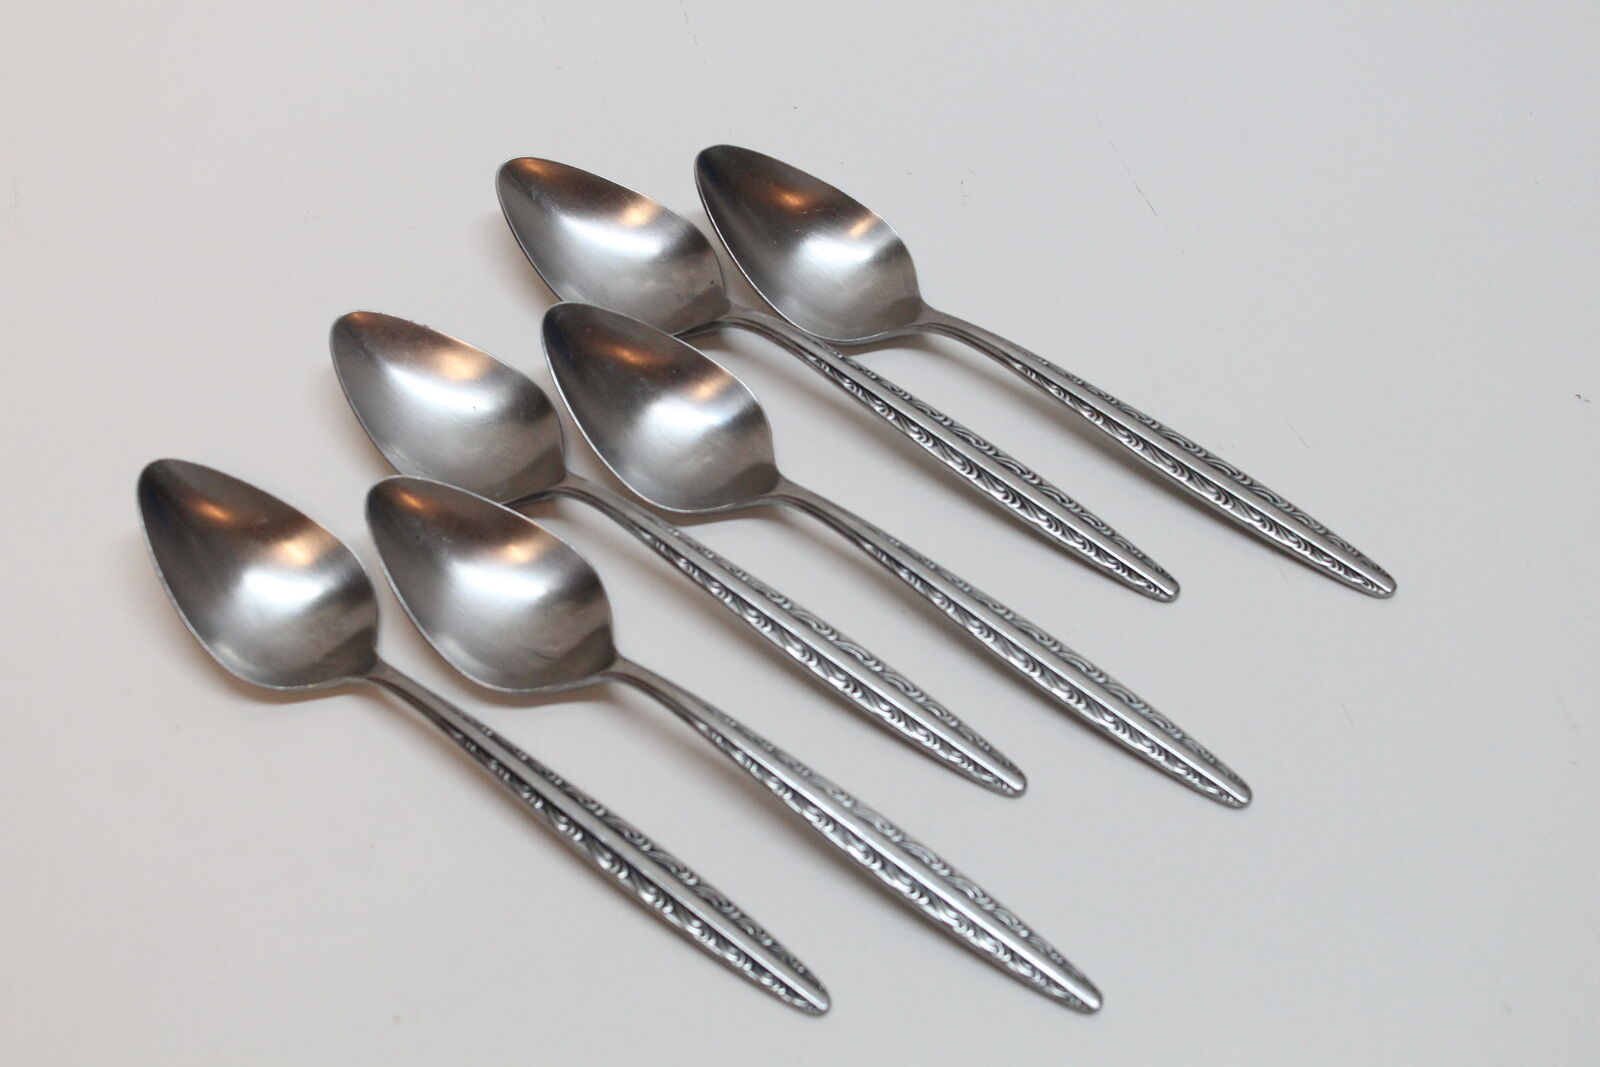 6 Vintage Dunham National Stainless Steel Flatware Place/Oval Soup Spoons